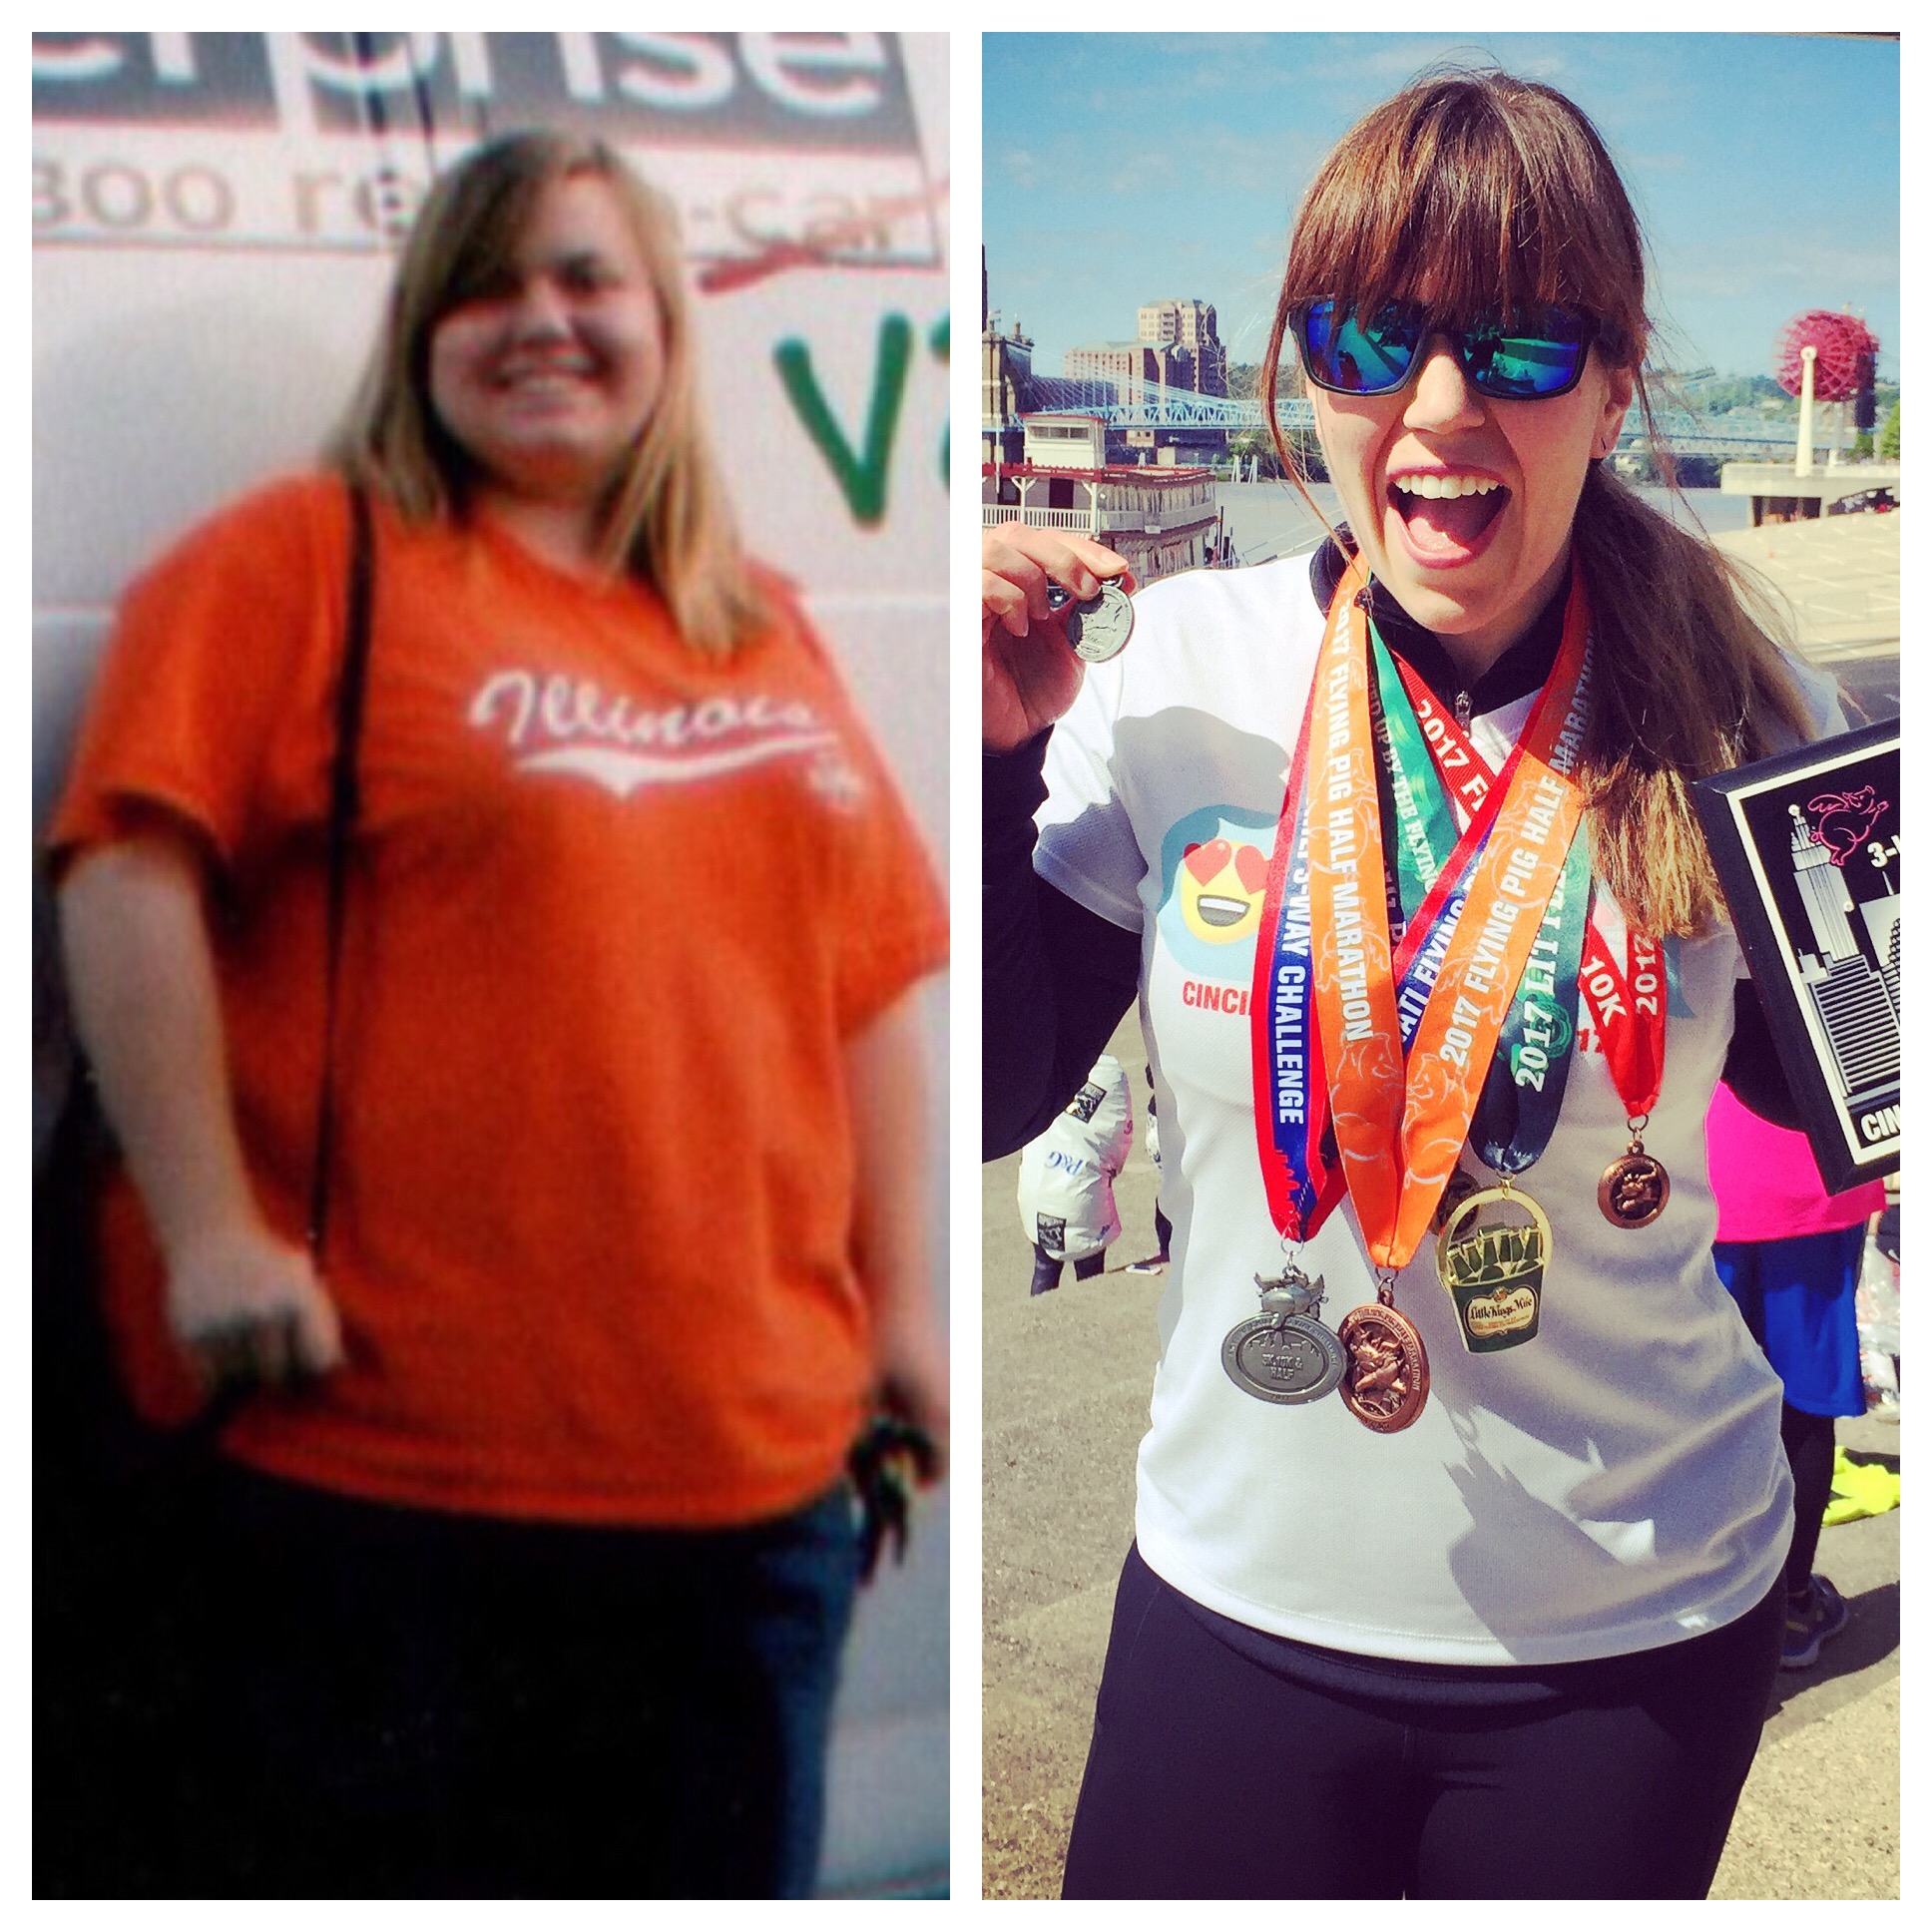 Pound This podcast host Amanda Valentine, before and after losing 100 lbs.